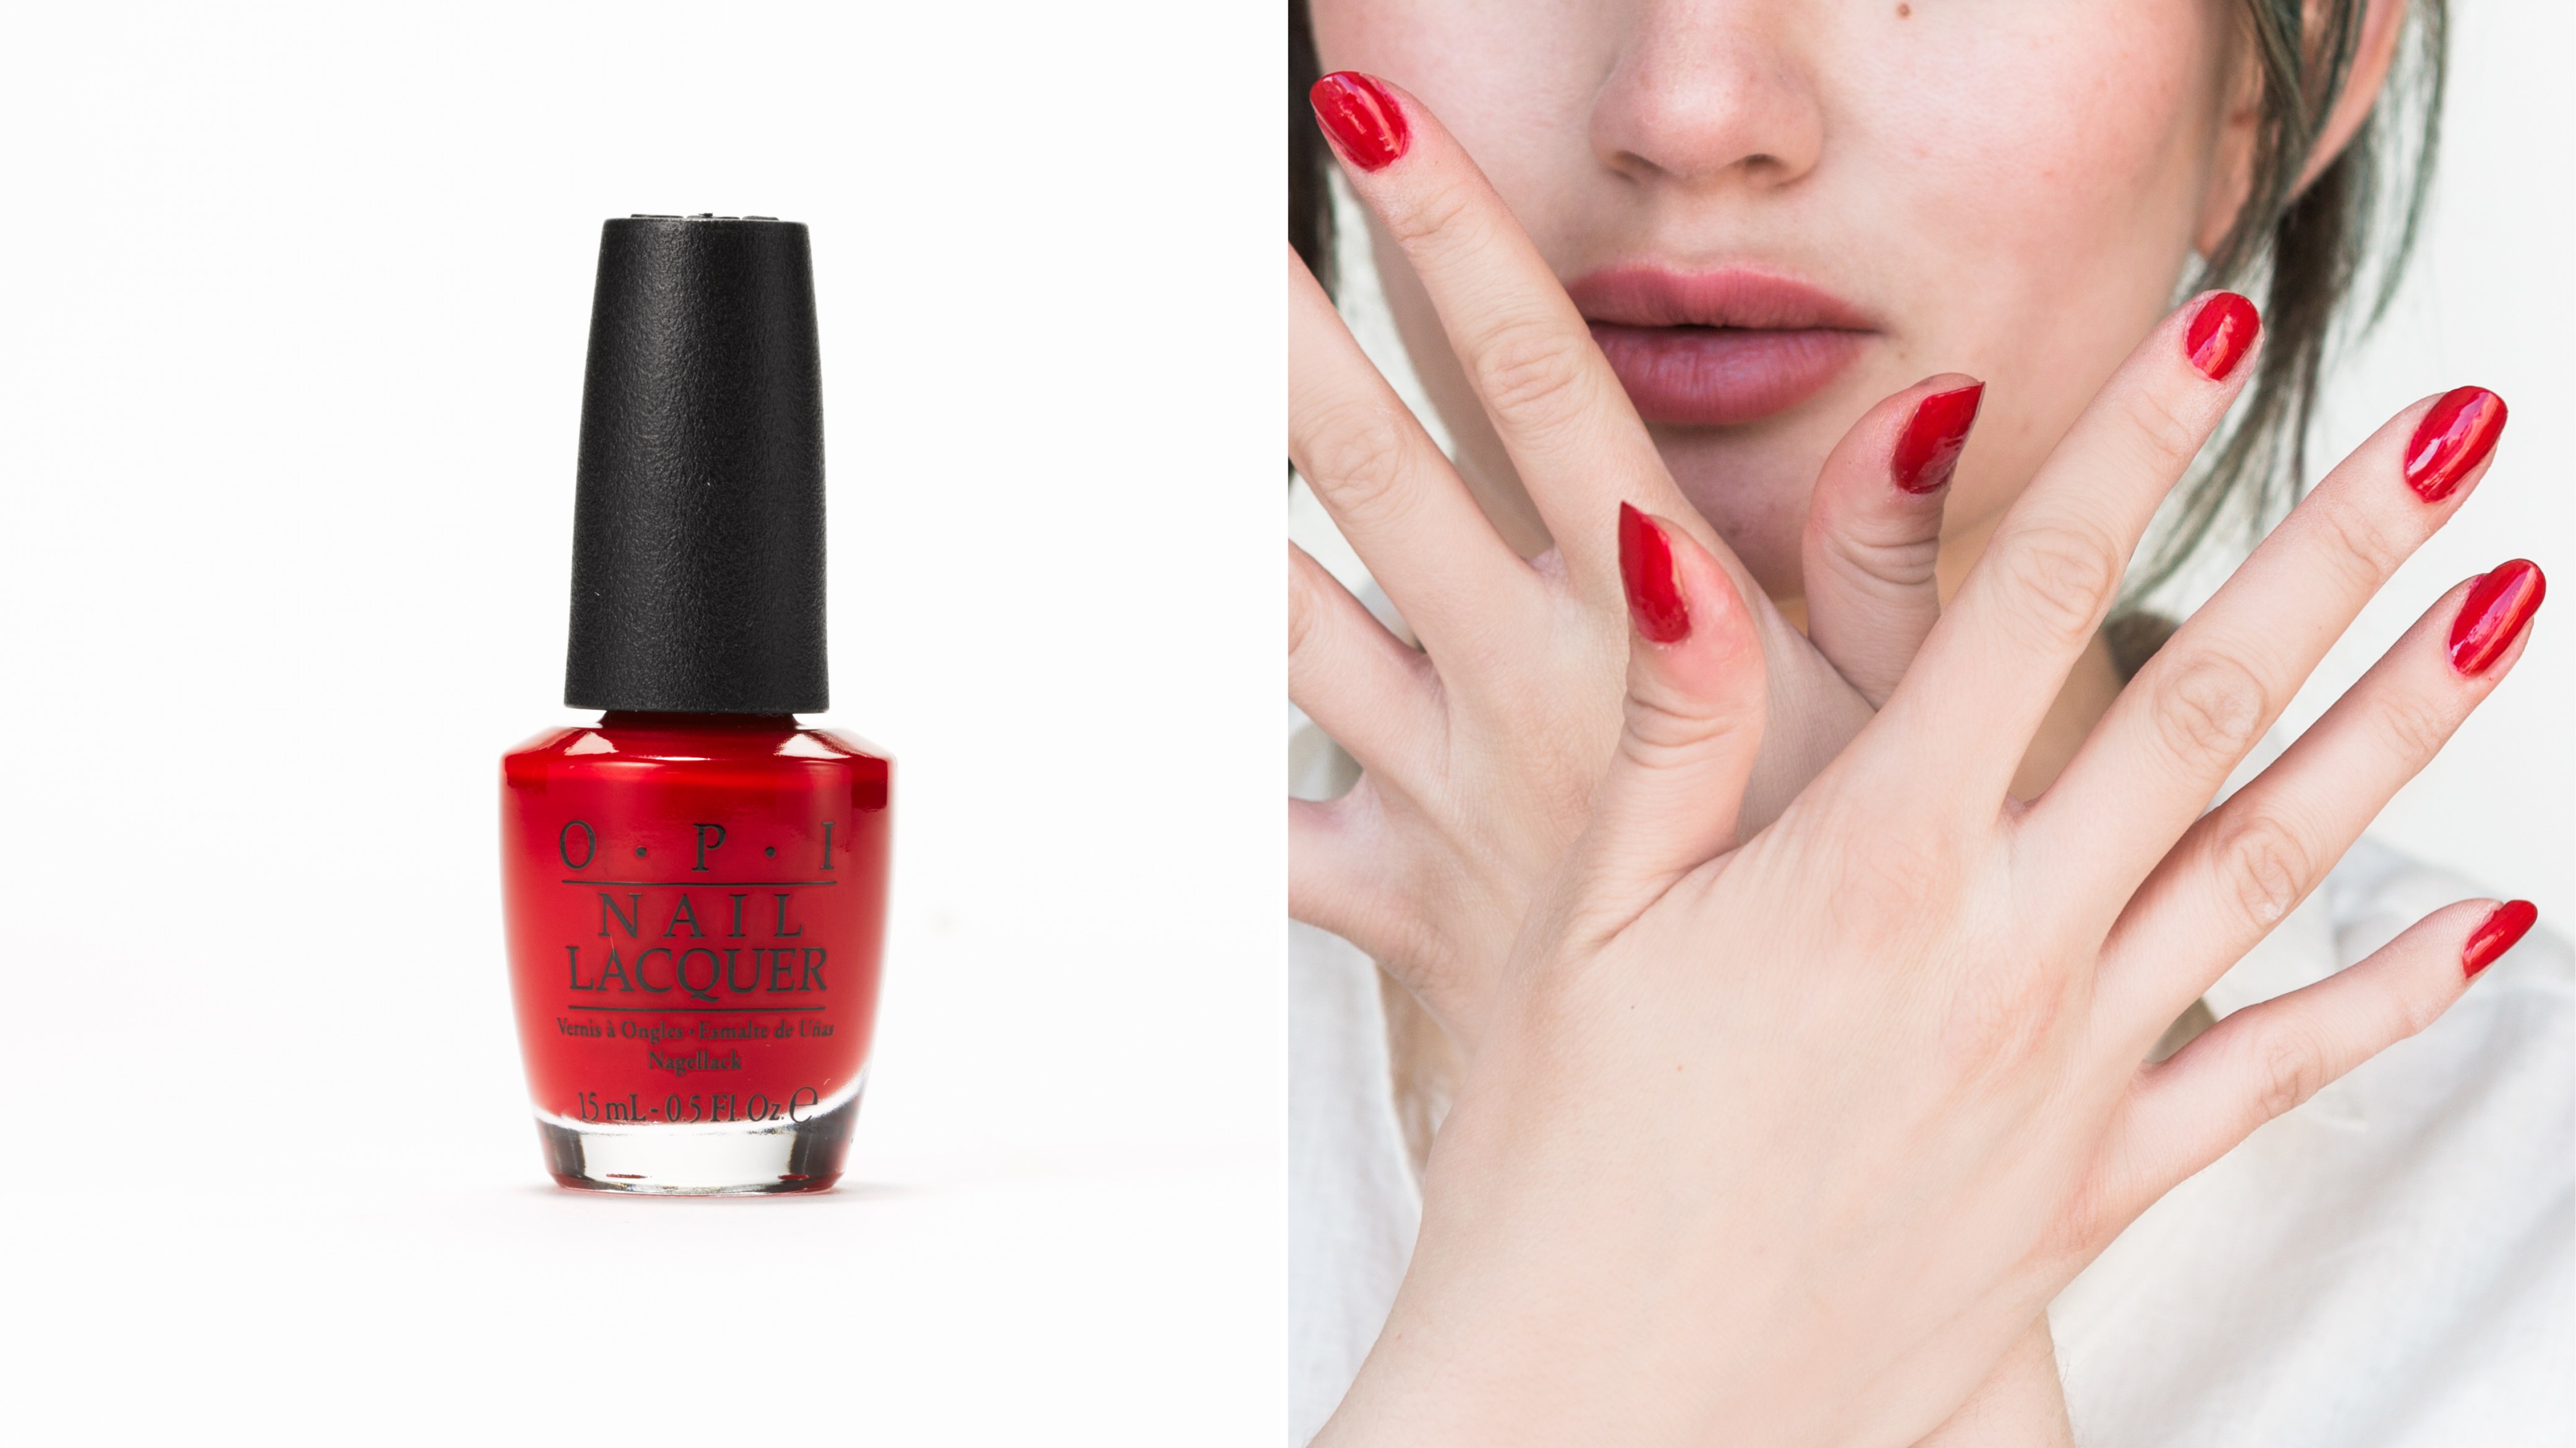 OPI Nail Lacquer in Big Apple Red Review | Allure